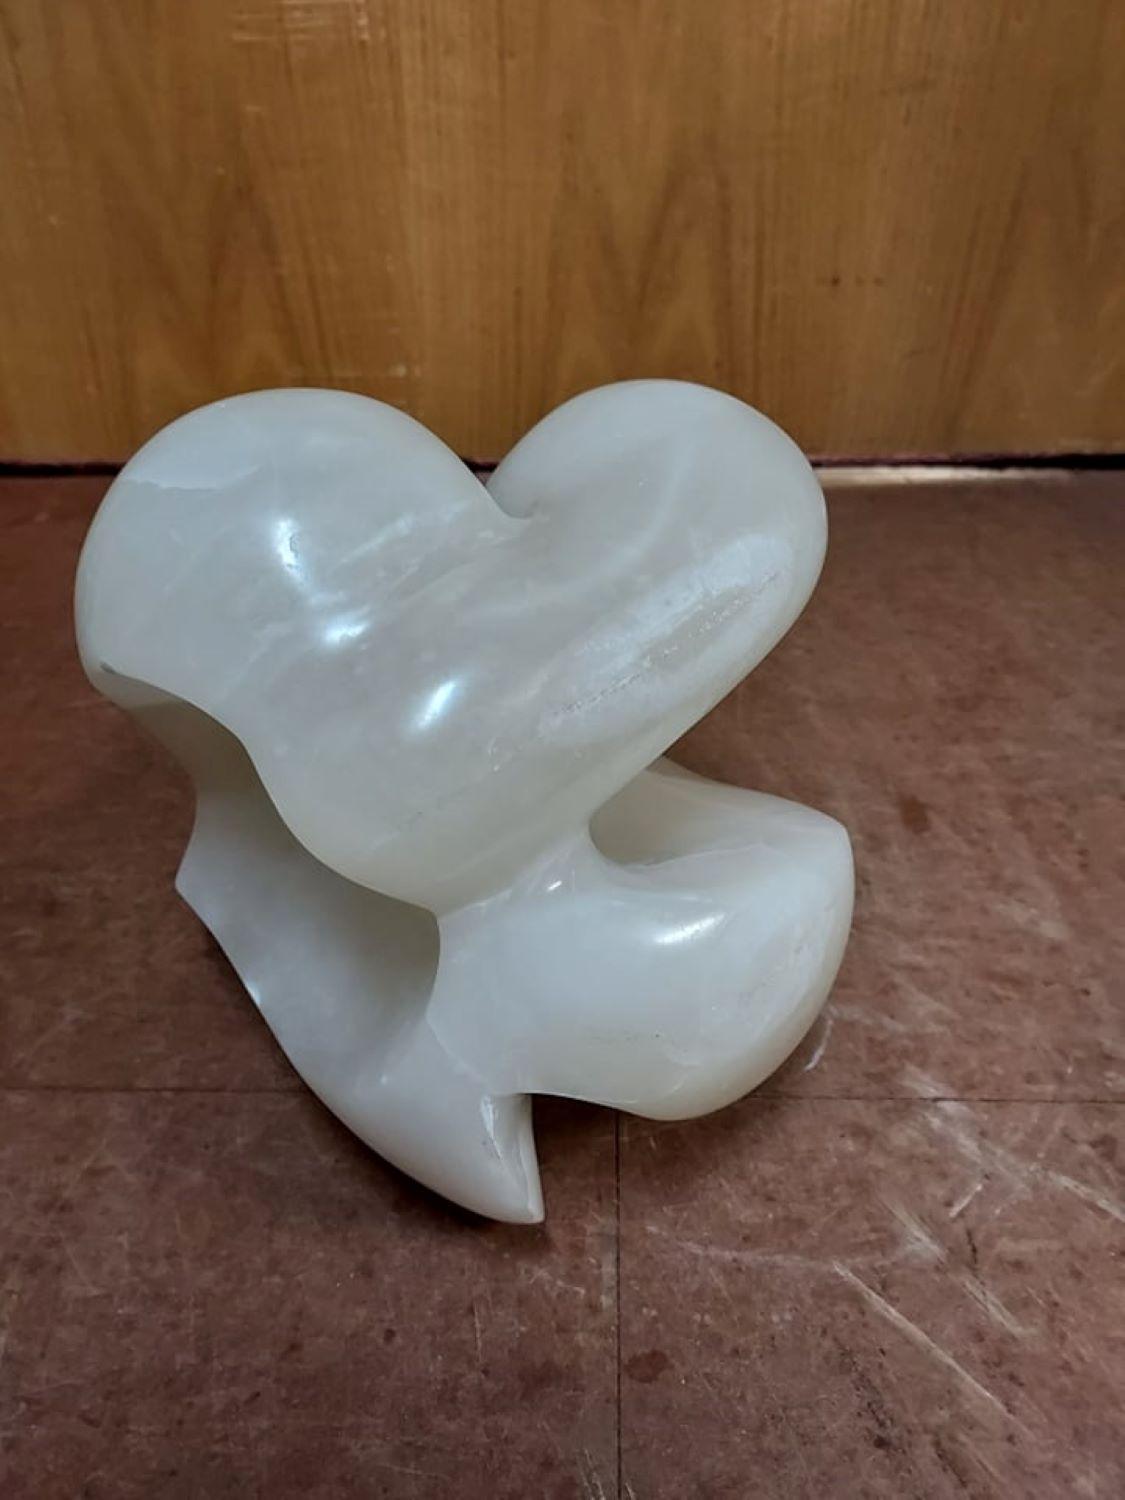 Alabaster Sculpture
Italian Alabaster is a pleasure to work with. Carved thinly, the translucency of the stone allows light to show the beauty of the material said the artist DeanMars 
